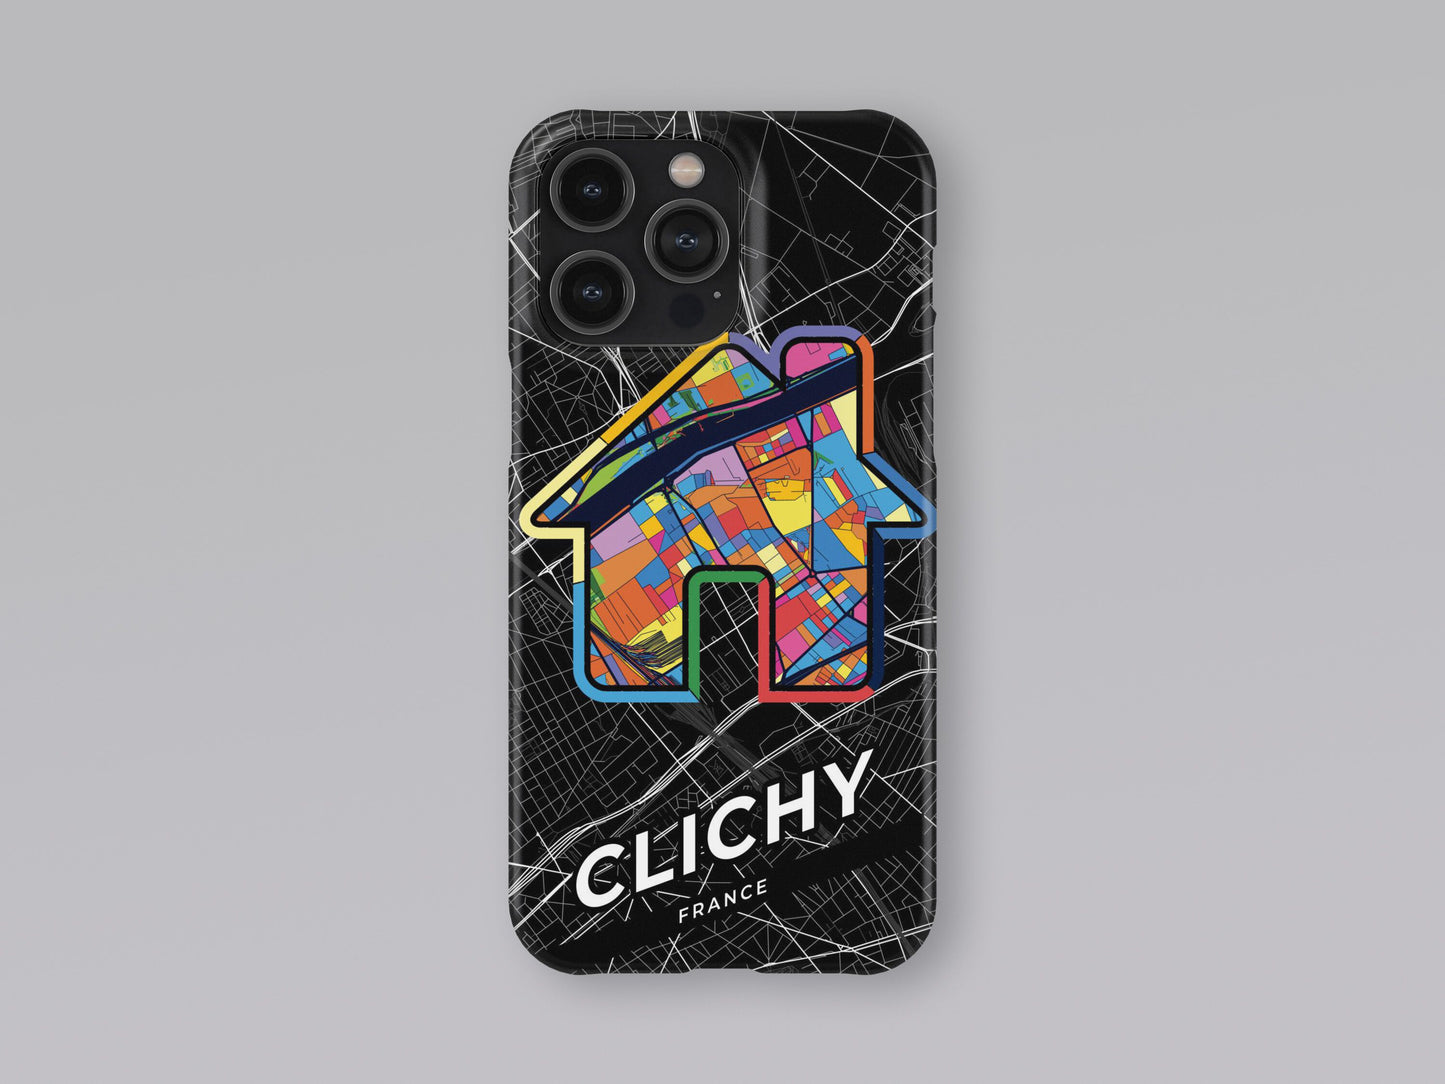 Clichy France slim phone case with colorful icon. Birthday, wedding or housewarming gift. Couple match cases. 3